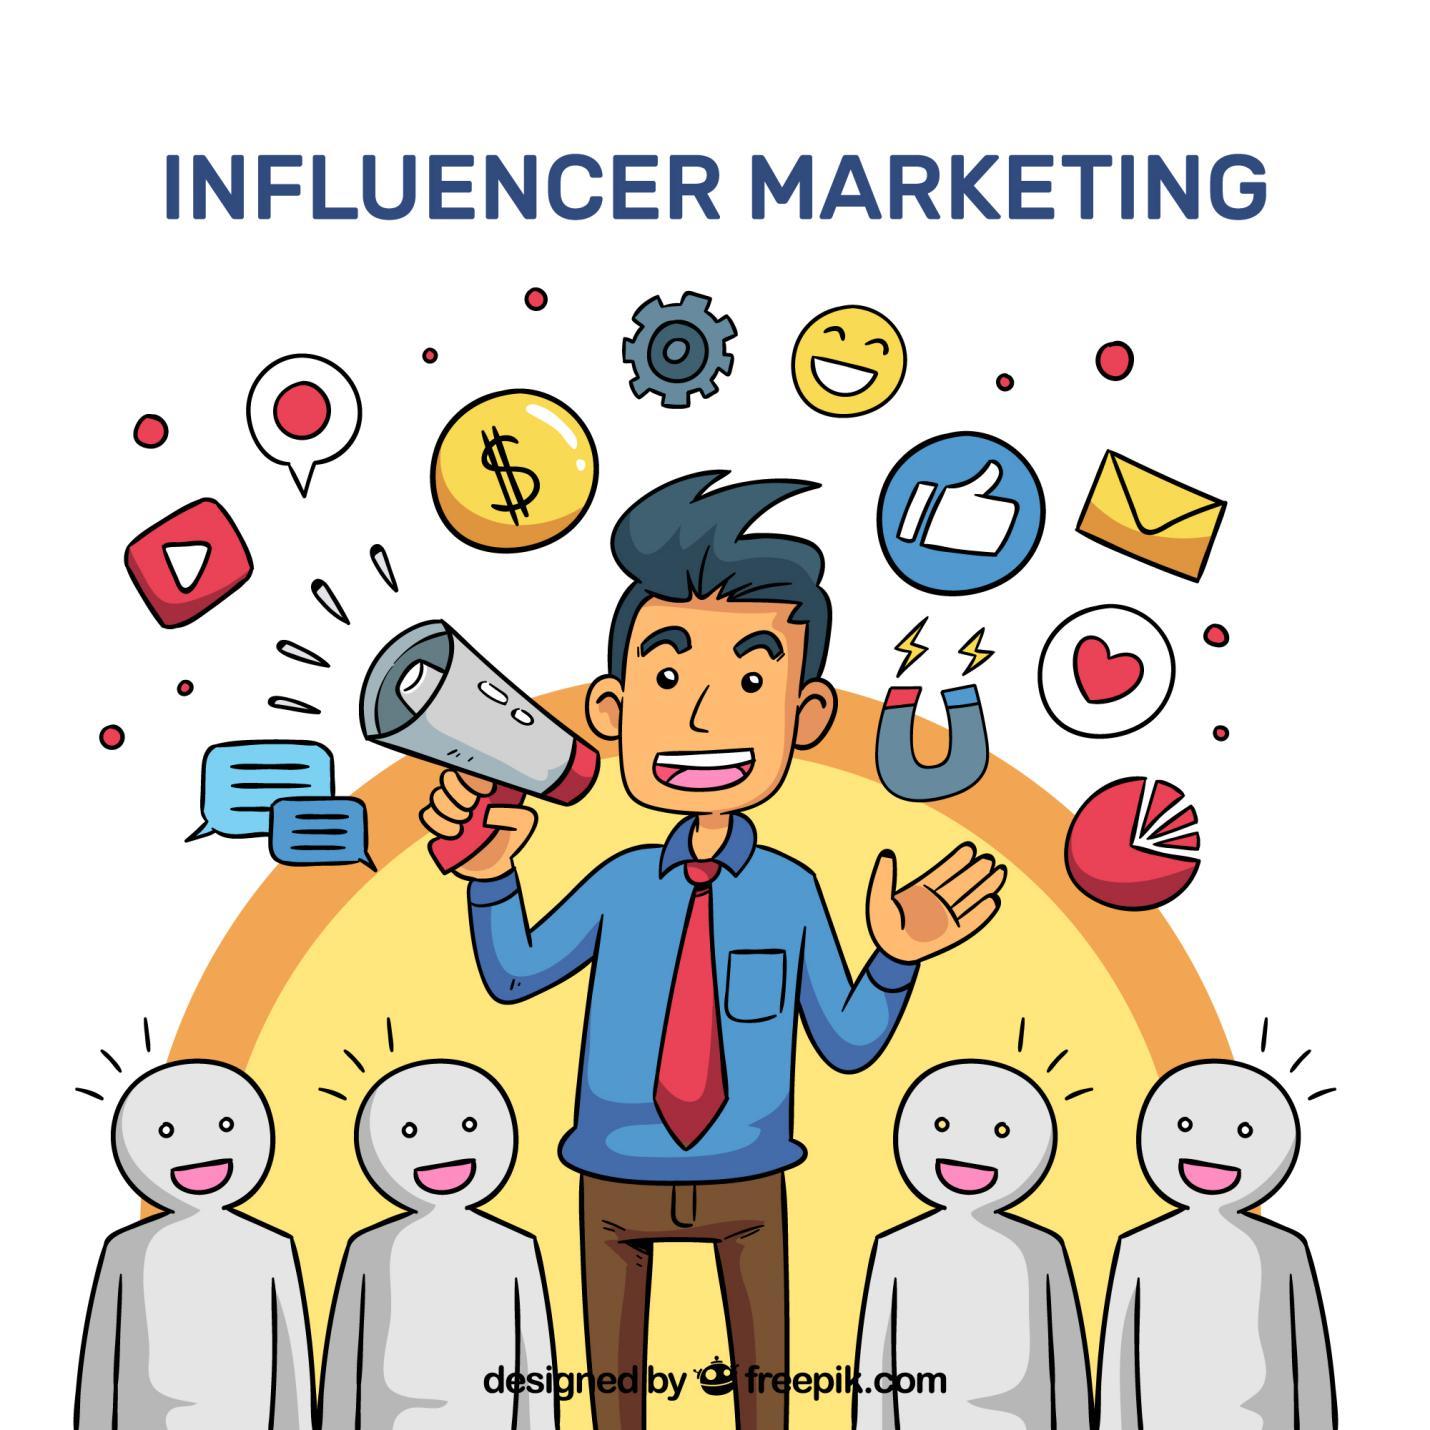 Why You Should Consider Adding Influencer Marketing to Your Business Strategy - RankWatch Blog